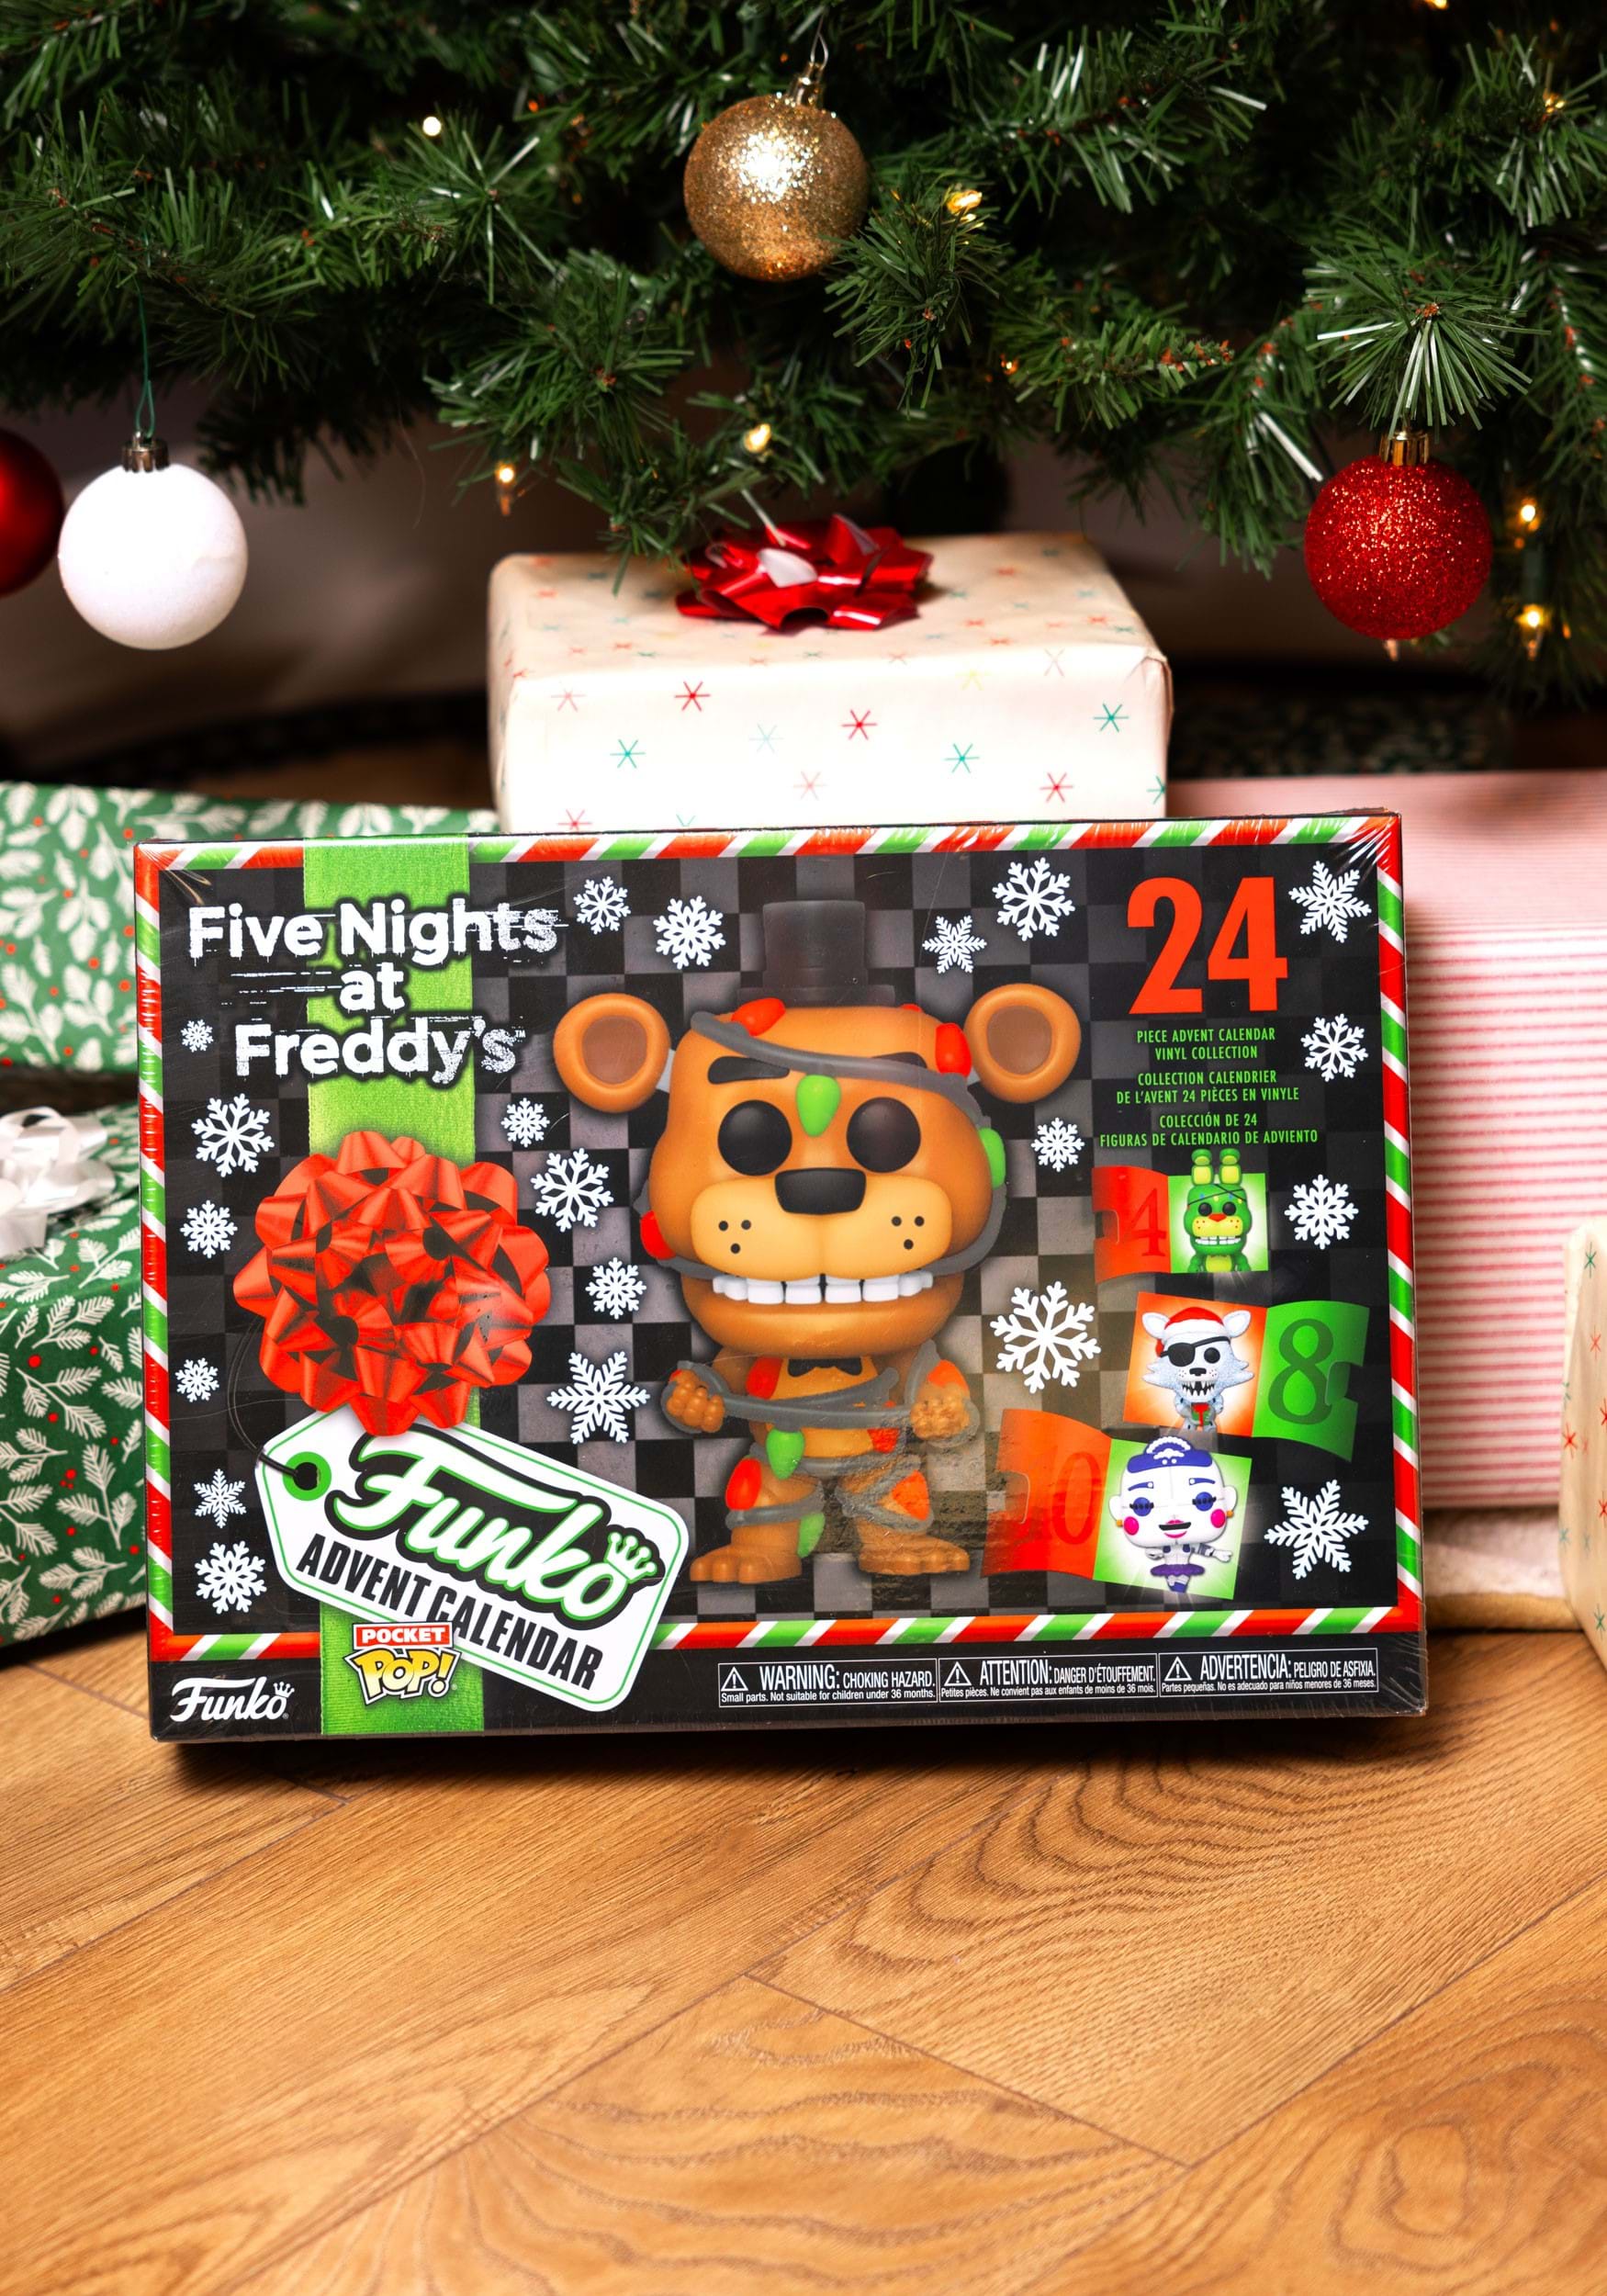 https://images.fun.com/products/93499/1-1/five-nights-at-freddys-2023-advent-calendar.jpg